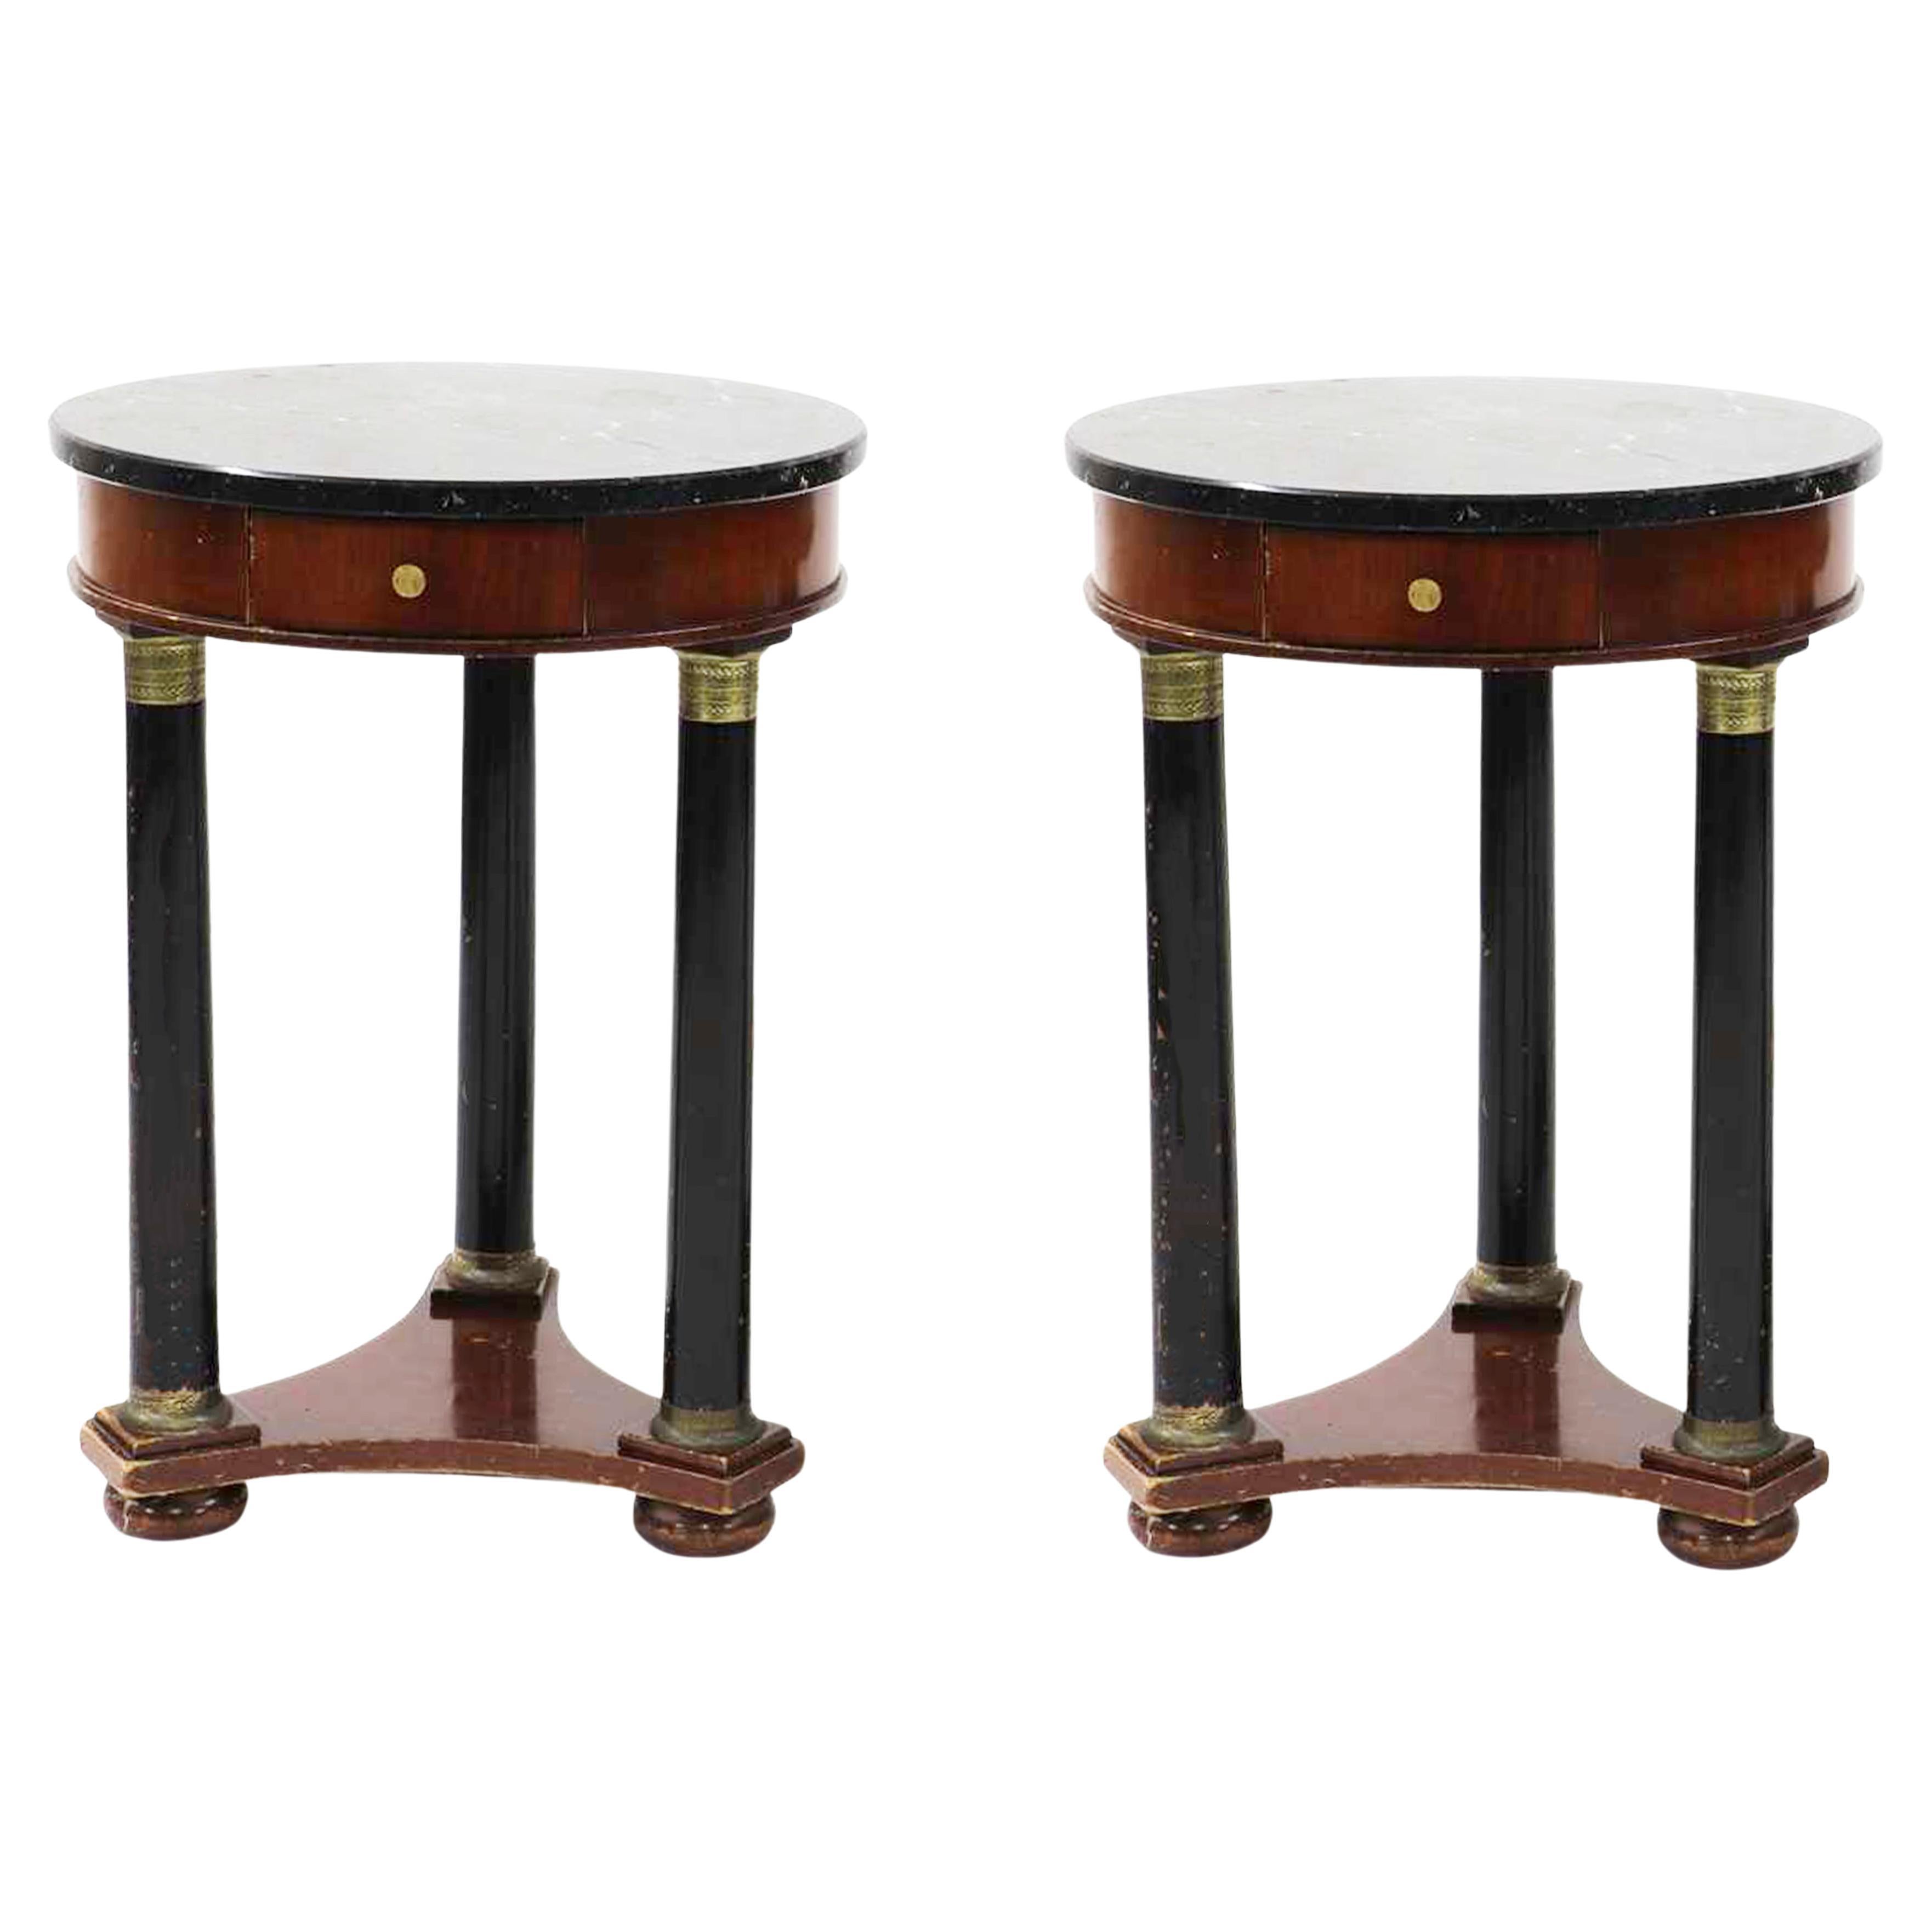 A Pair of Empire Marble Gueridon Side Tables Raised On Ebonized Column Supports For Sale